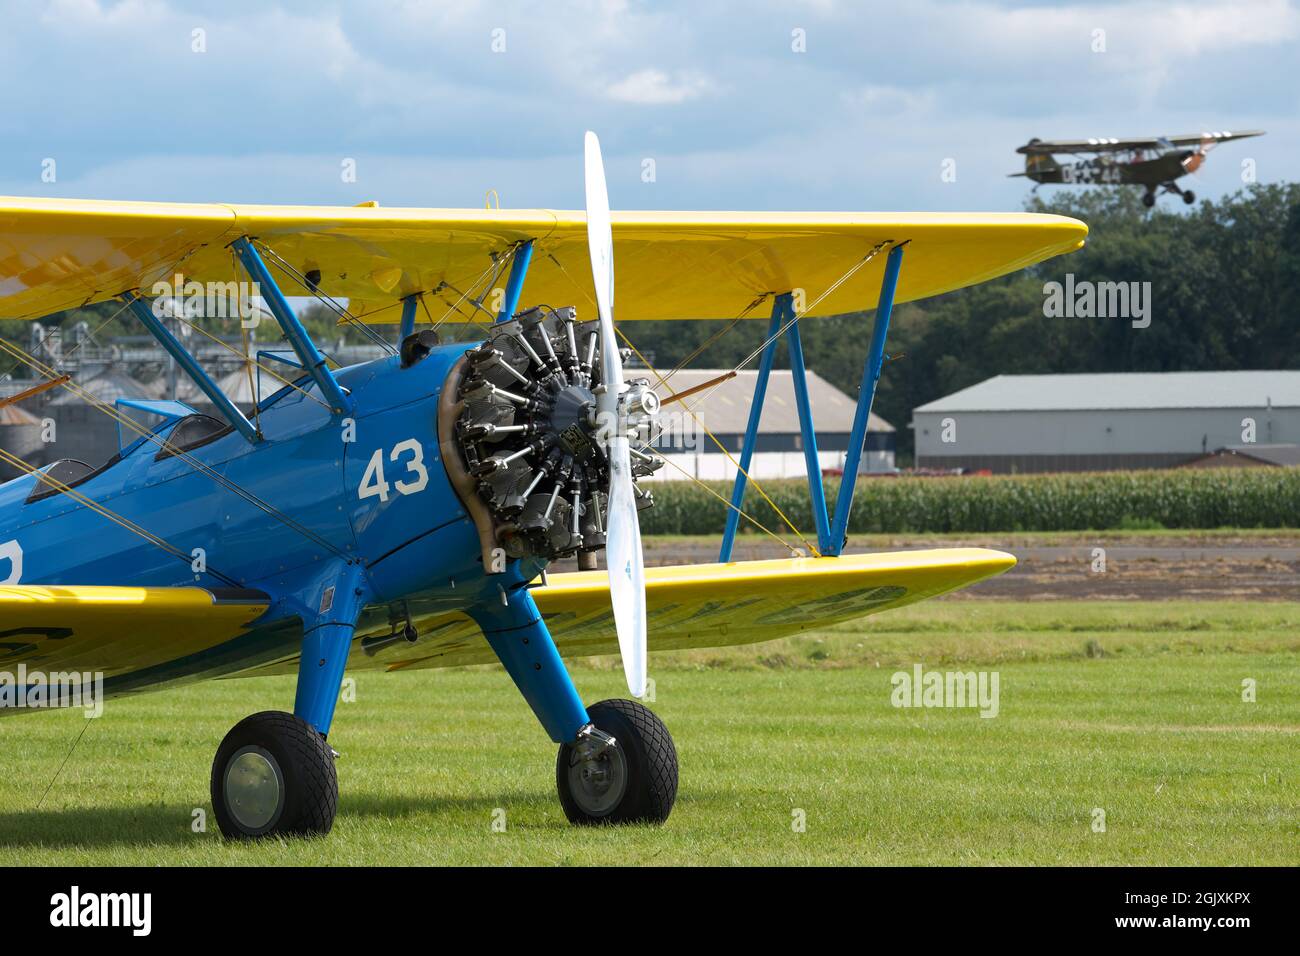 Boeing Stearman biplane training aircraft from WW2 with a vintage Piper Cub warbird flying in the background Stock Photo